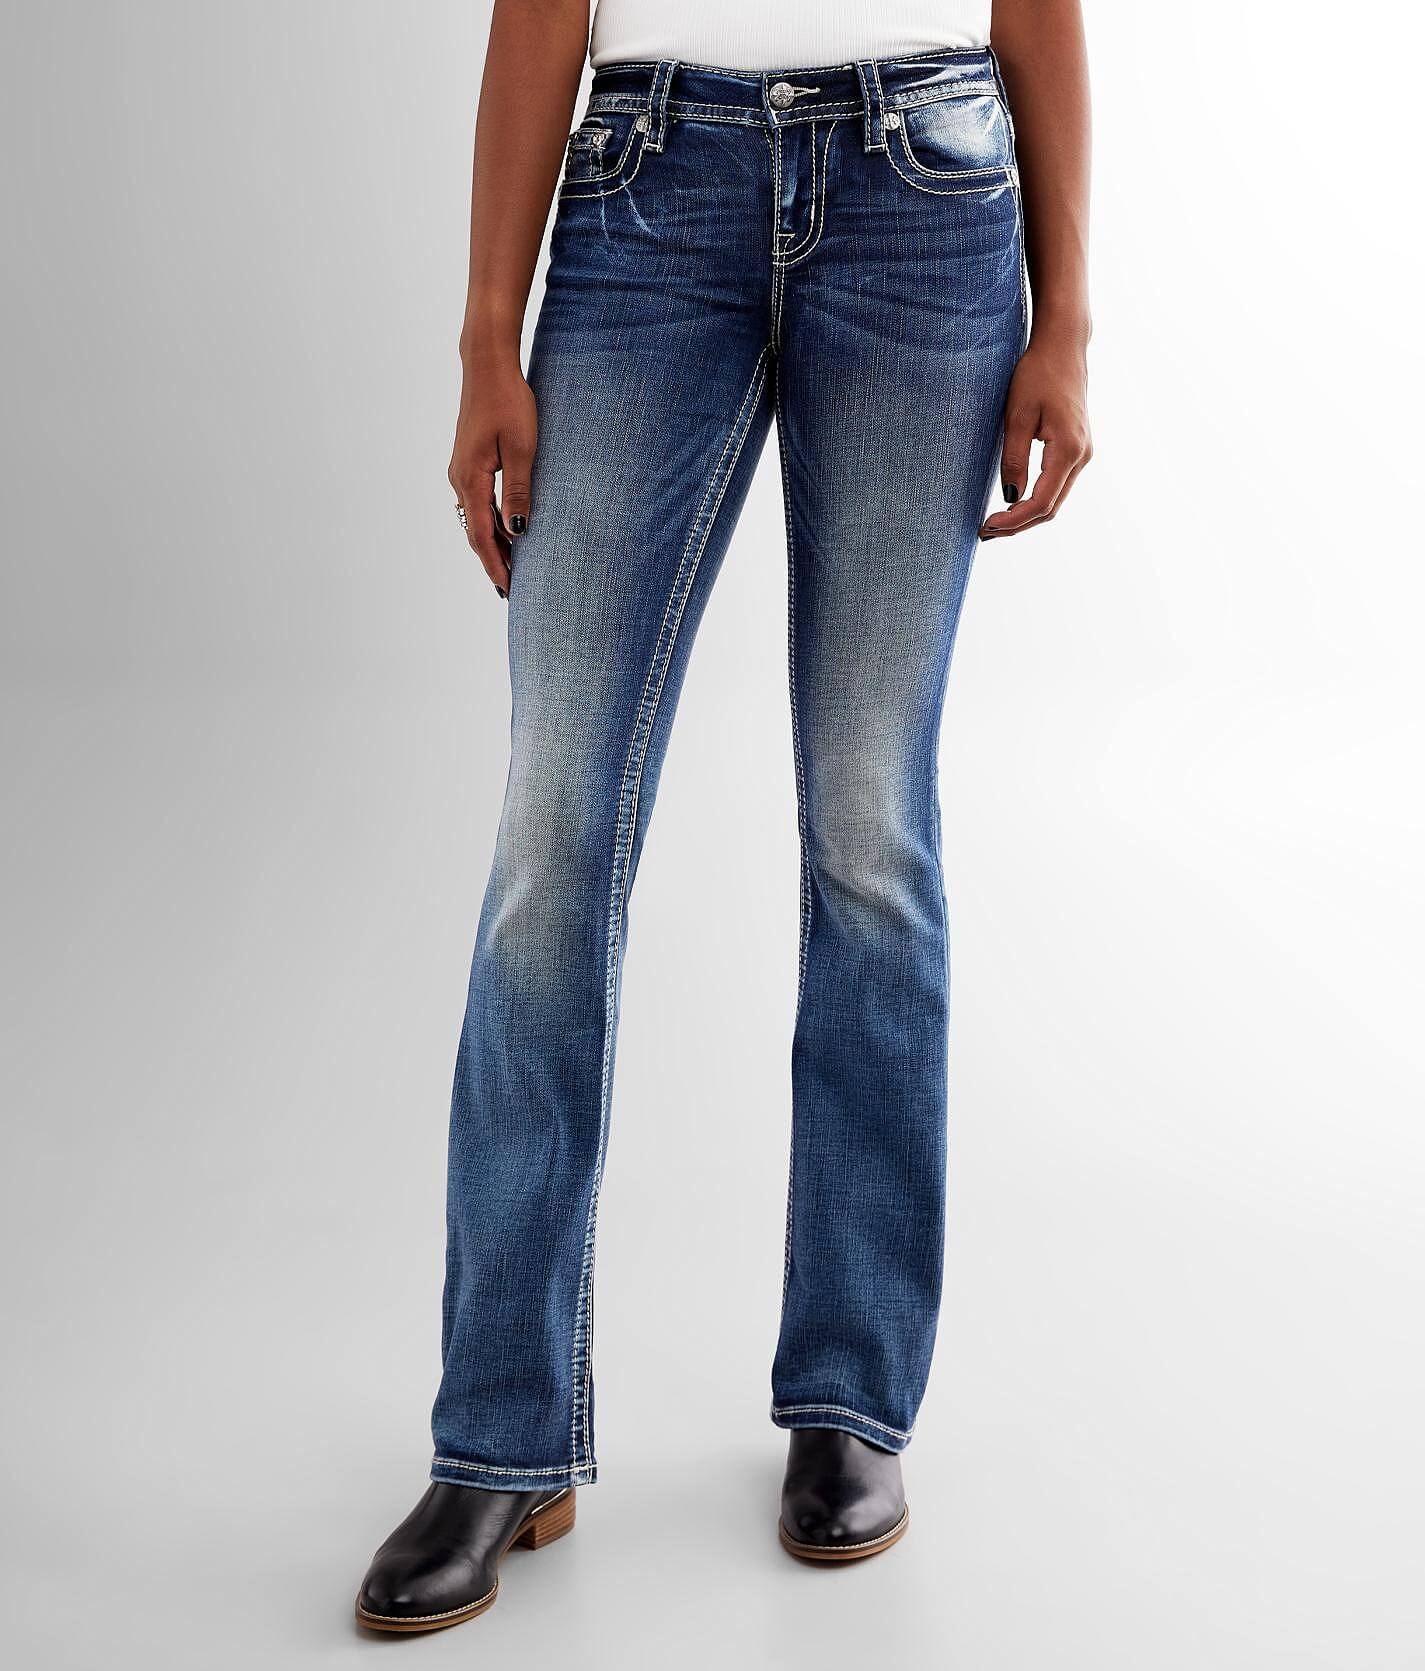 miss me jeans canada online